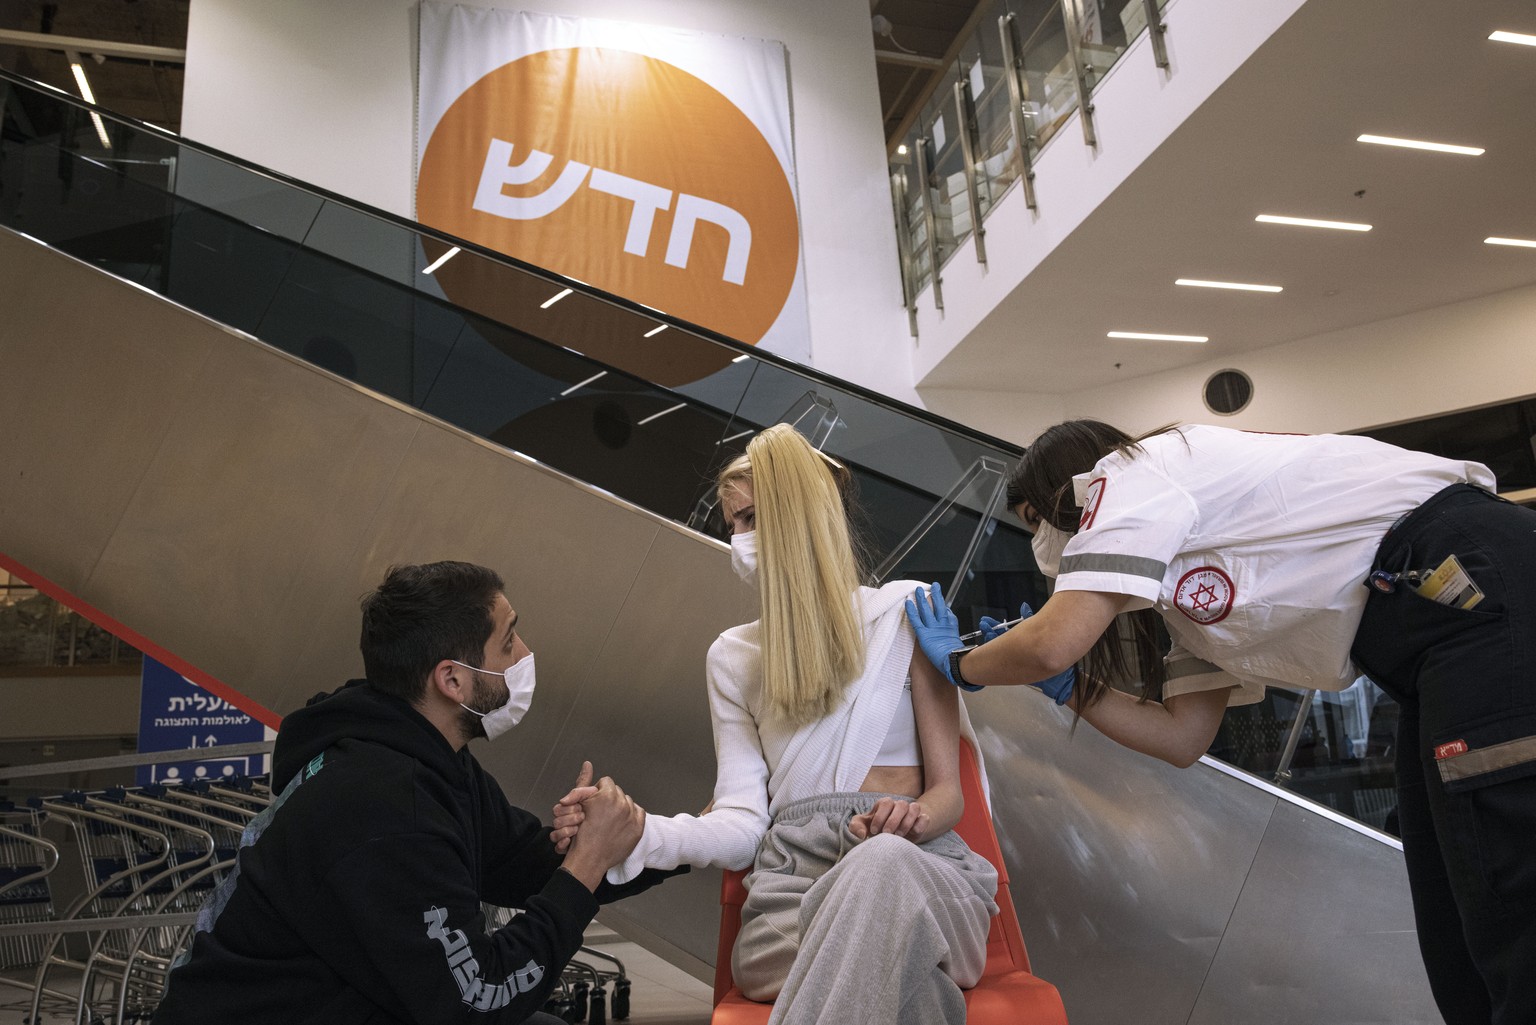 An Israeli paramedic from Magen David Adom medical services, administers a dose of the Pfizer-BioNtech COVID-19 vaccine to a woman at an Ikea store in Rishon Lezion, Israel, Monday, Feb. 22, 2021. Ike ...